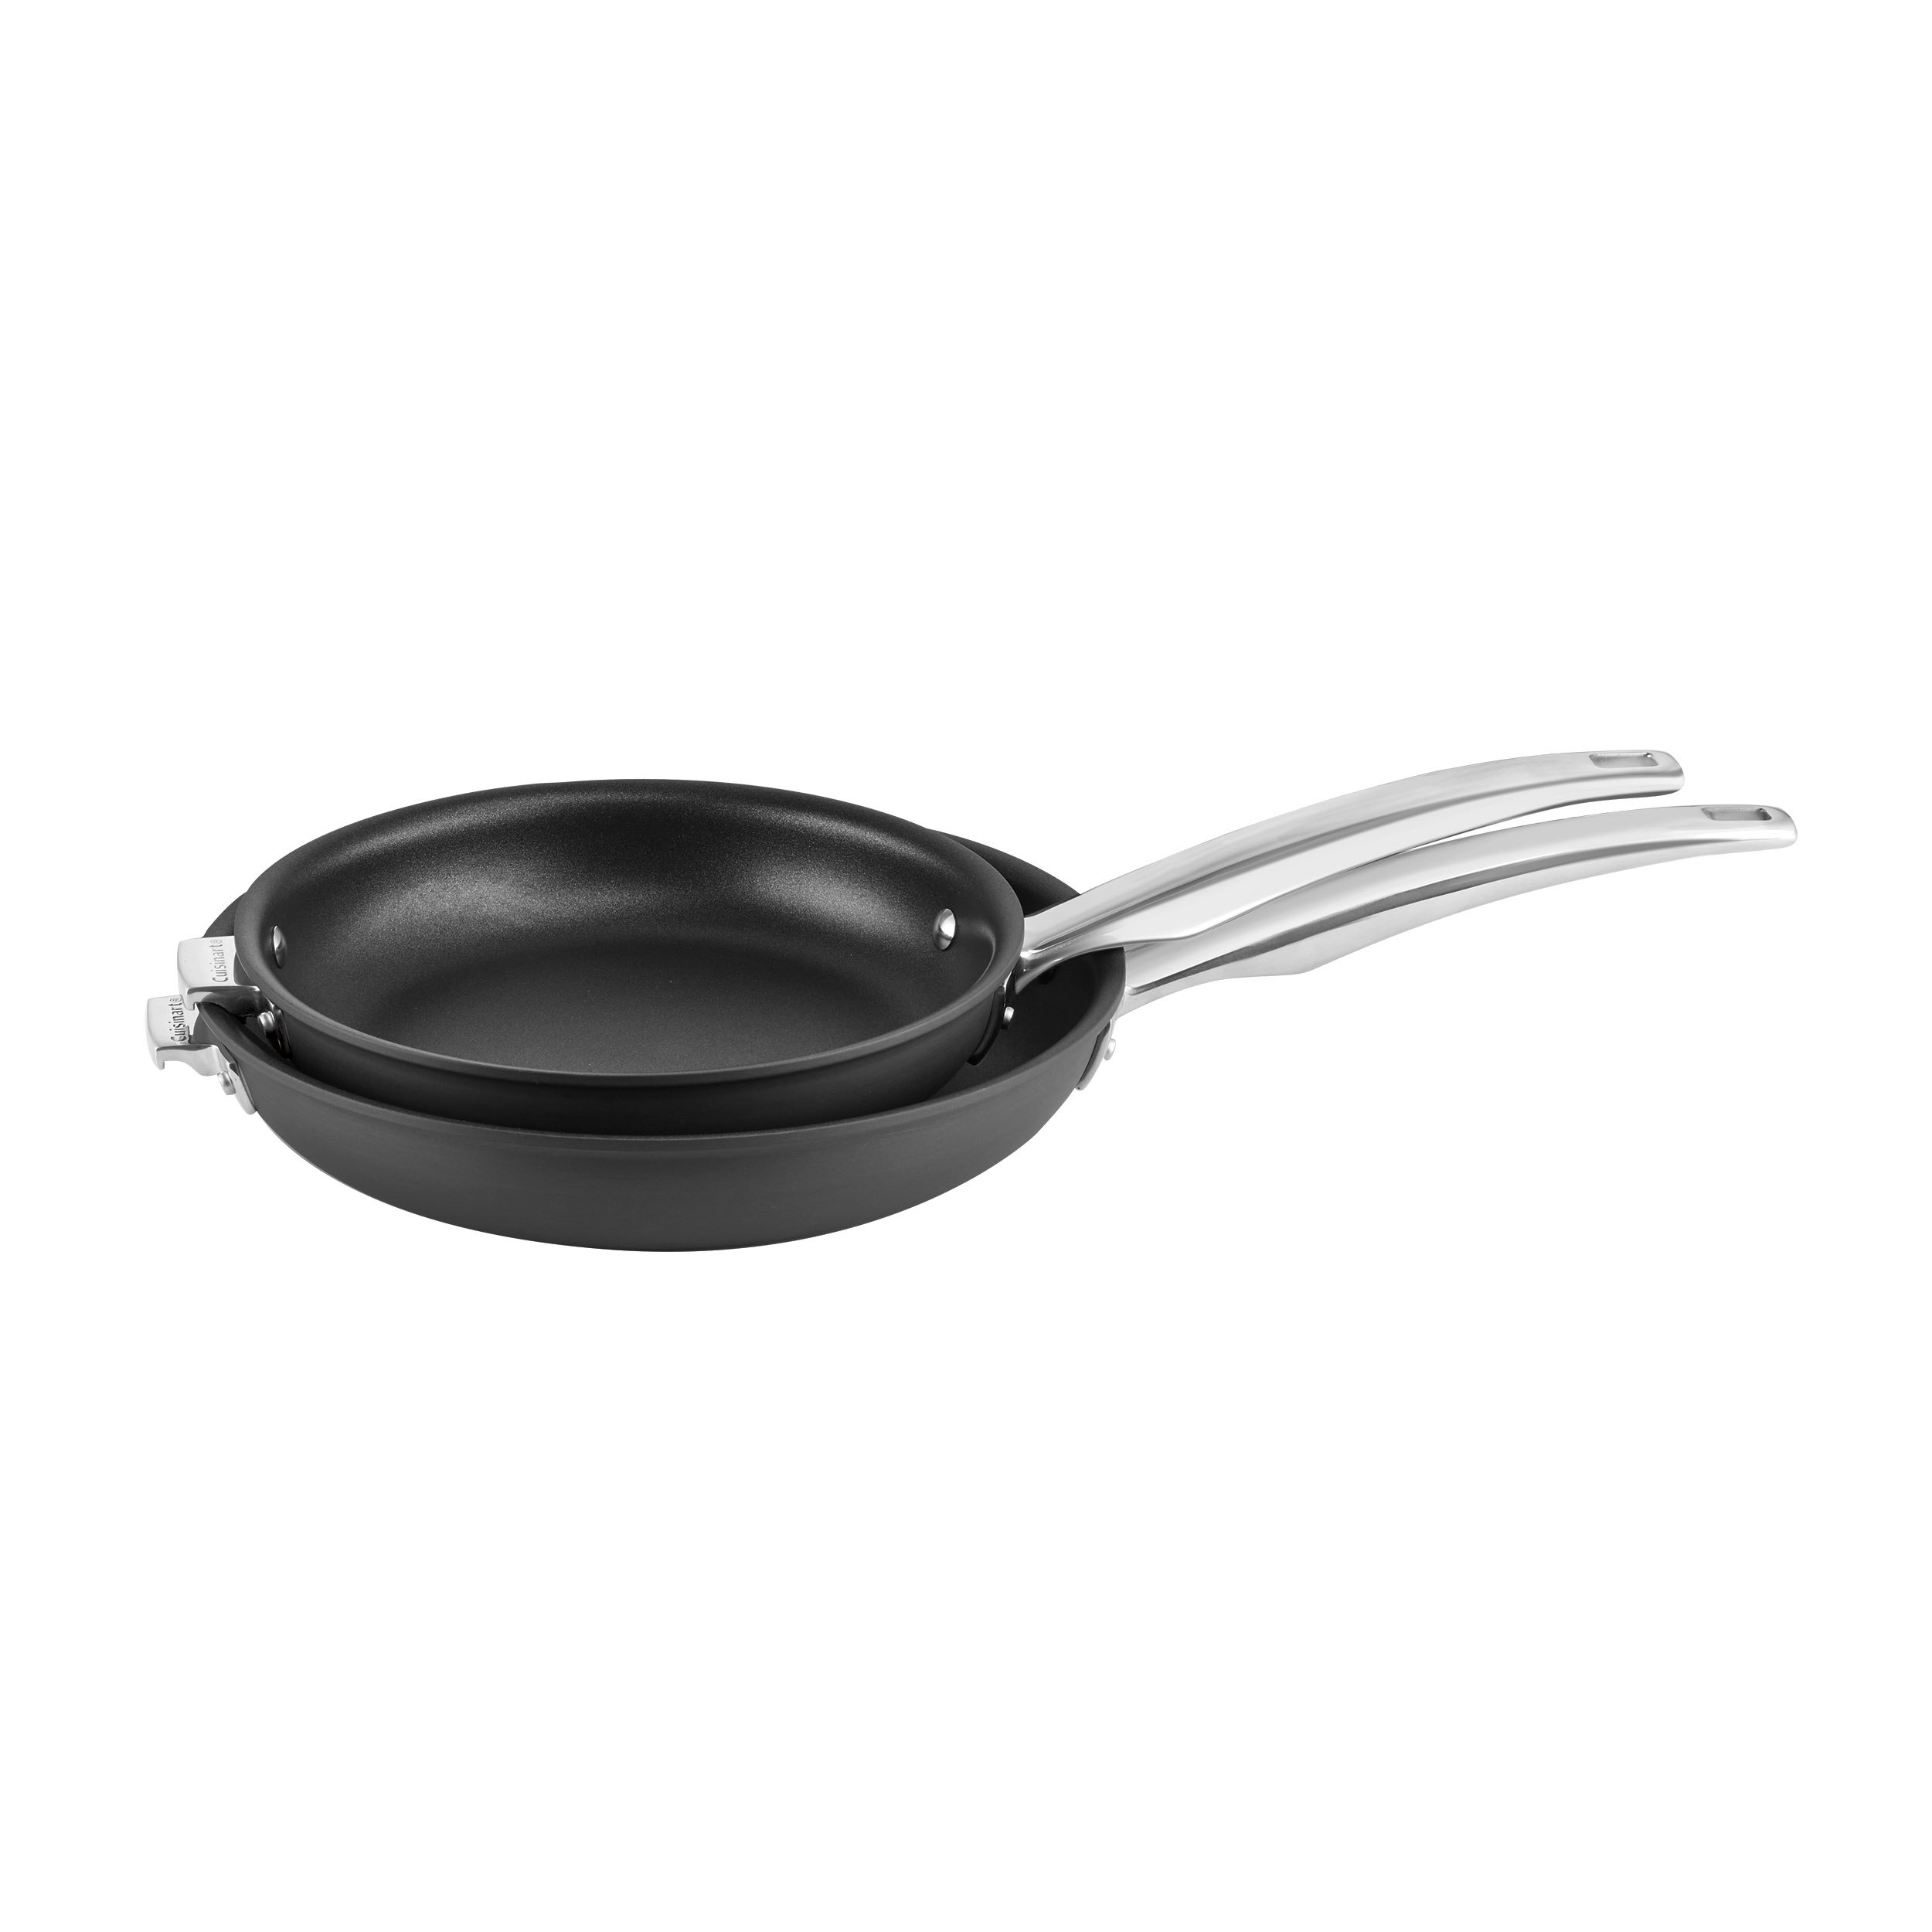 Cuisinart Classic 10 Hard Anodized Skillet - 6322-24 1 ct